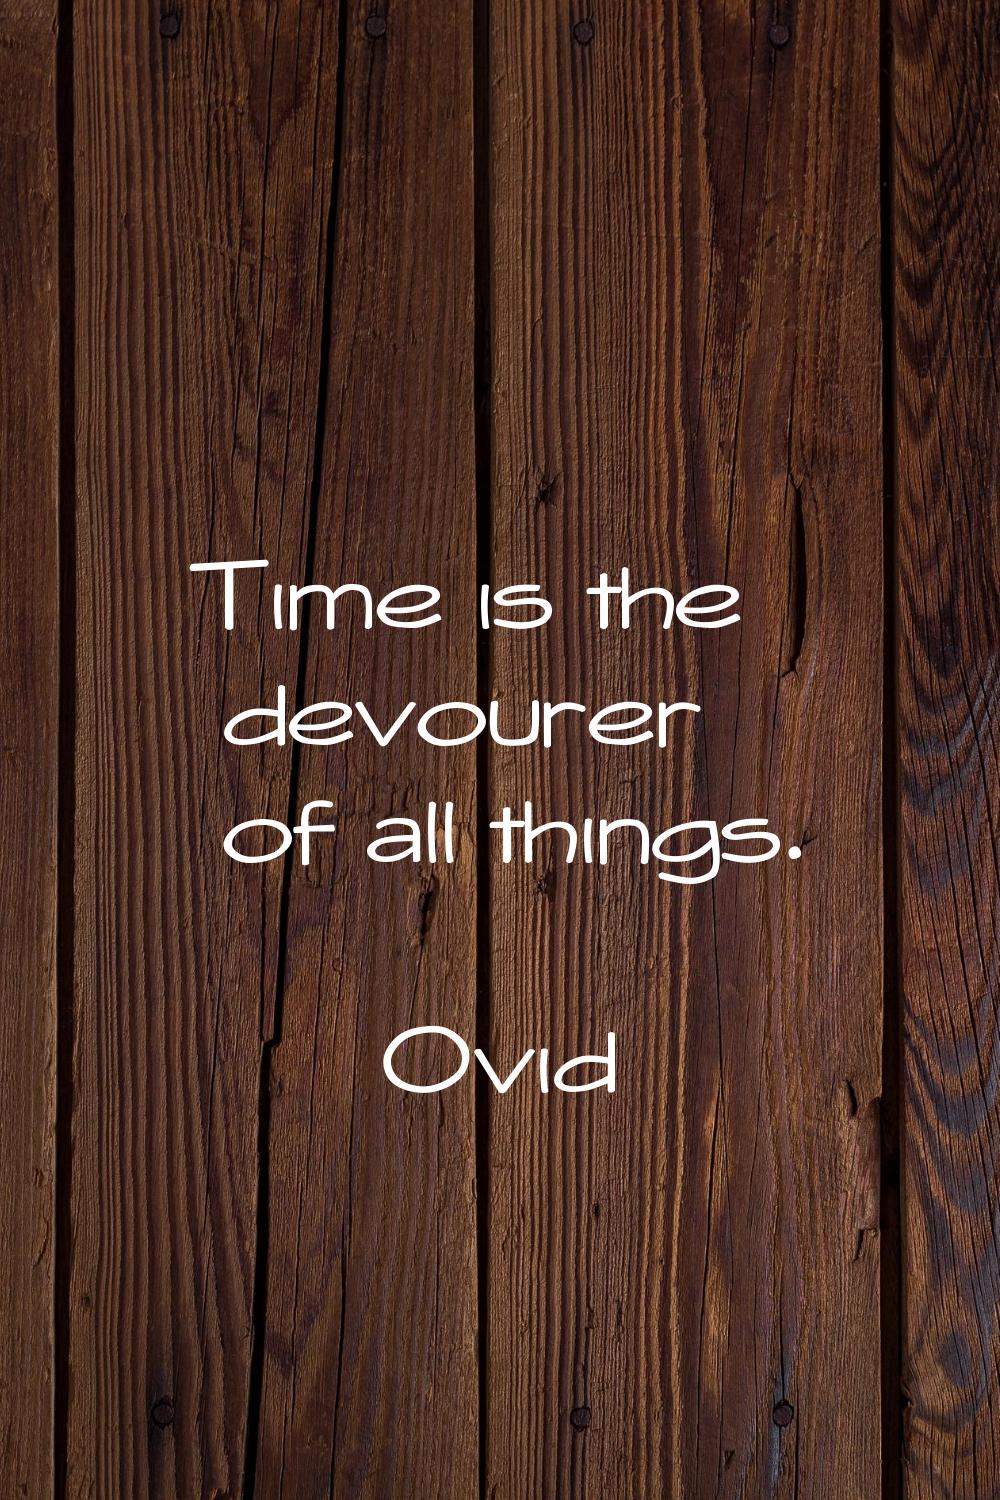 Time is the devourer of all things.